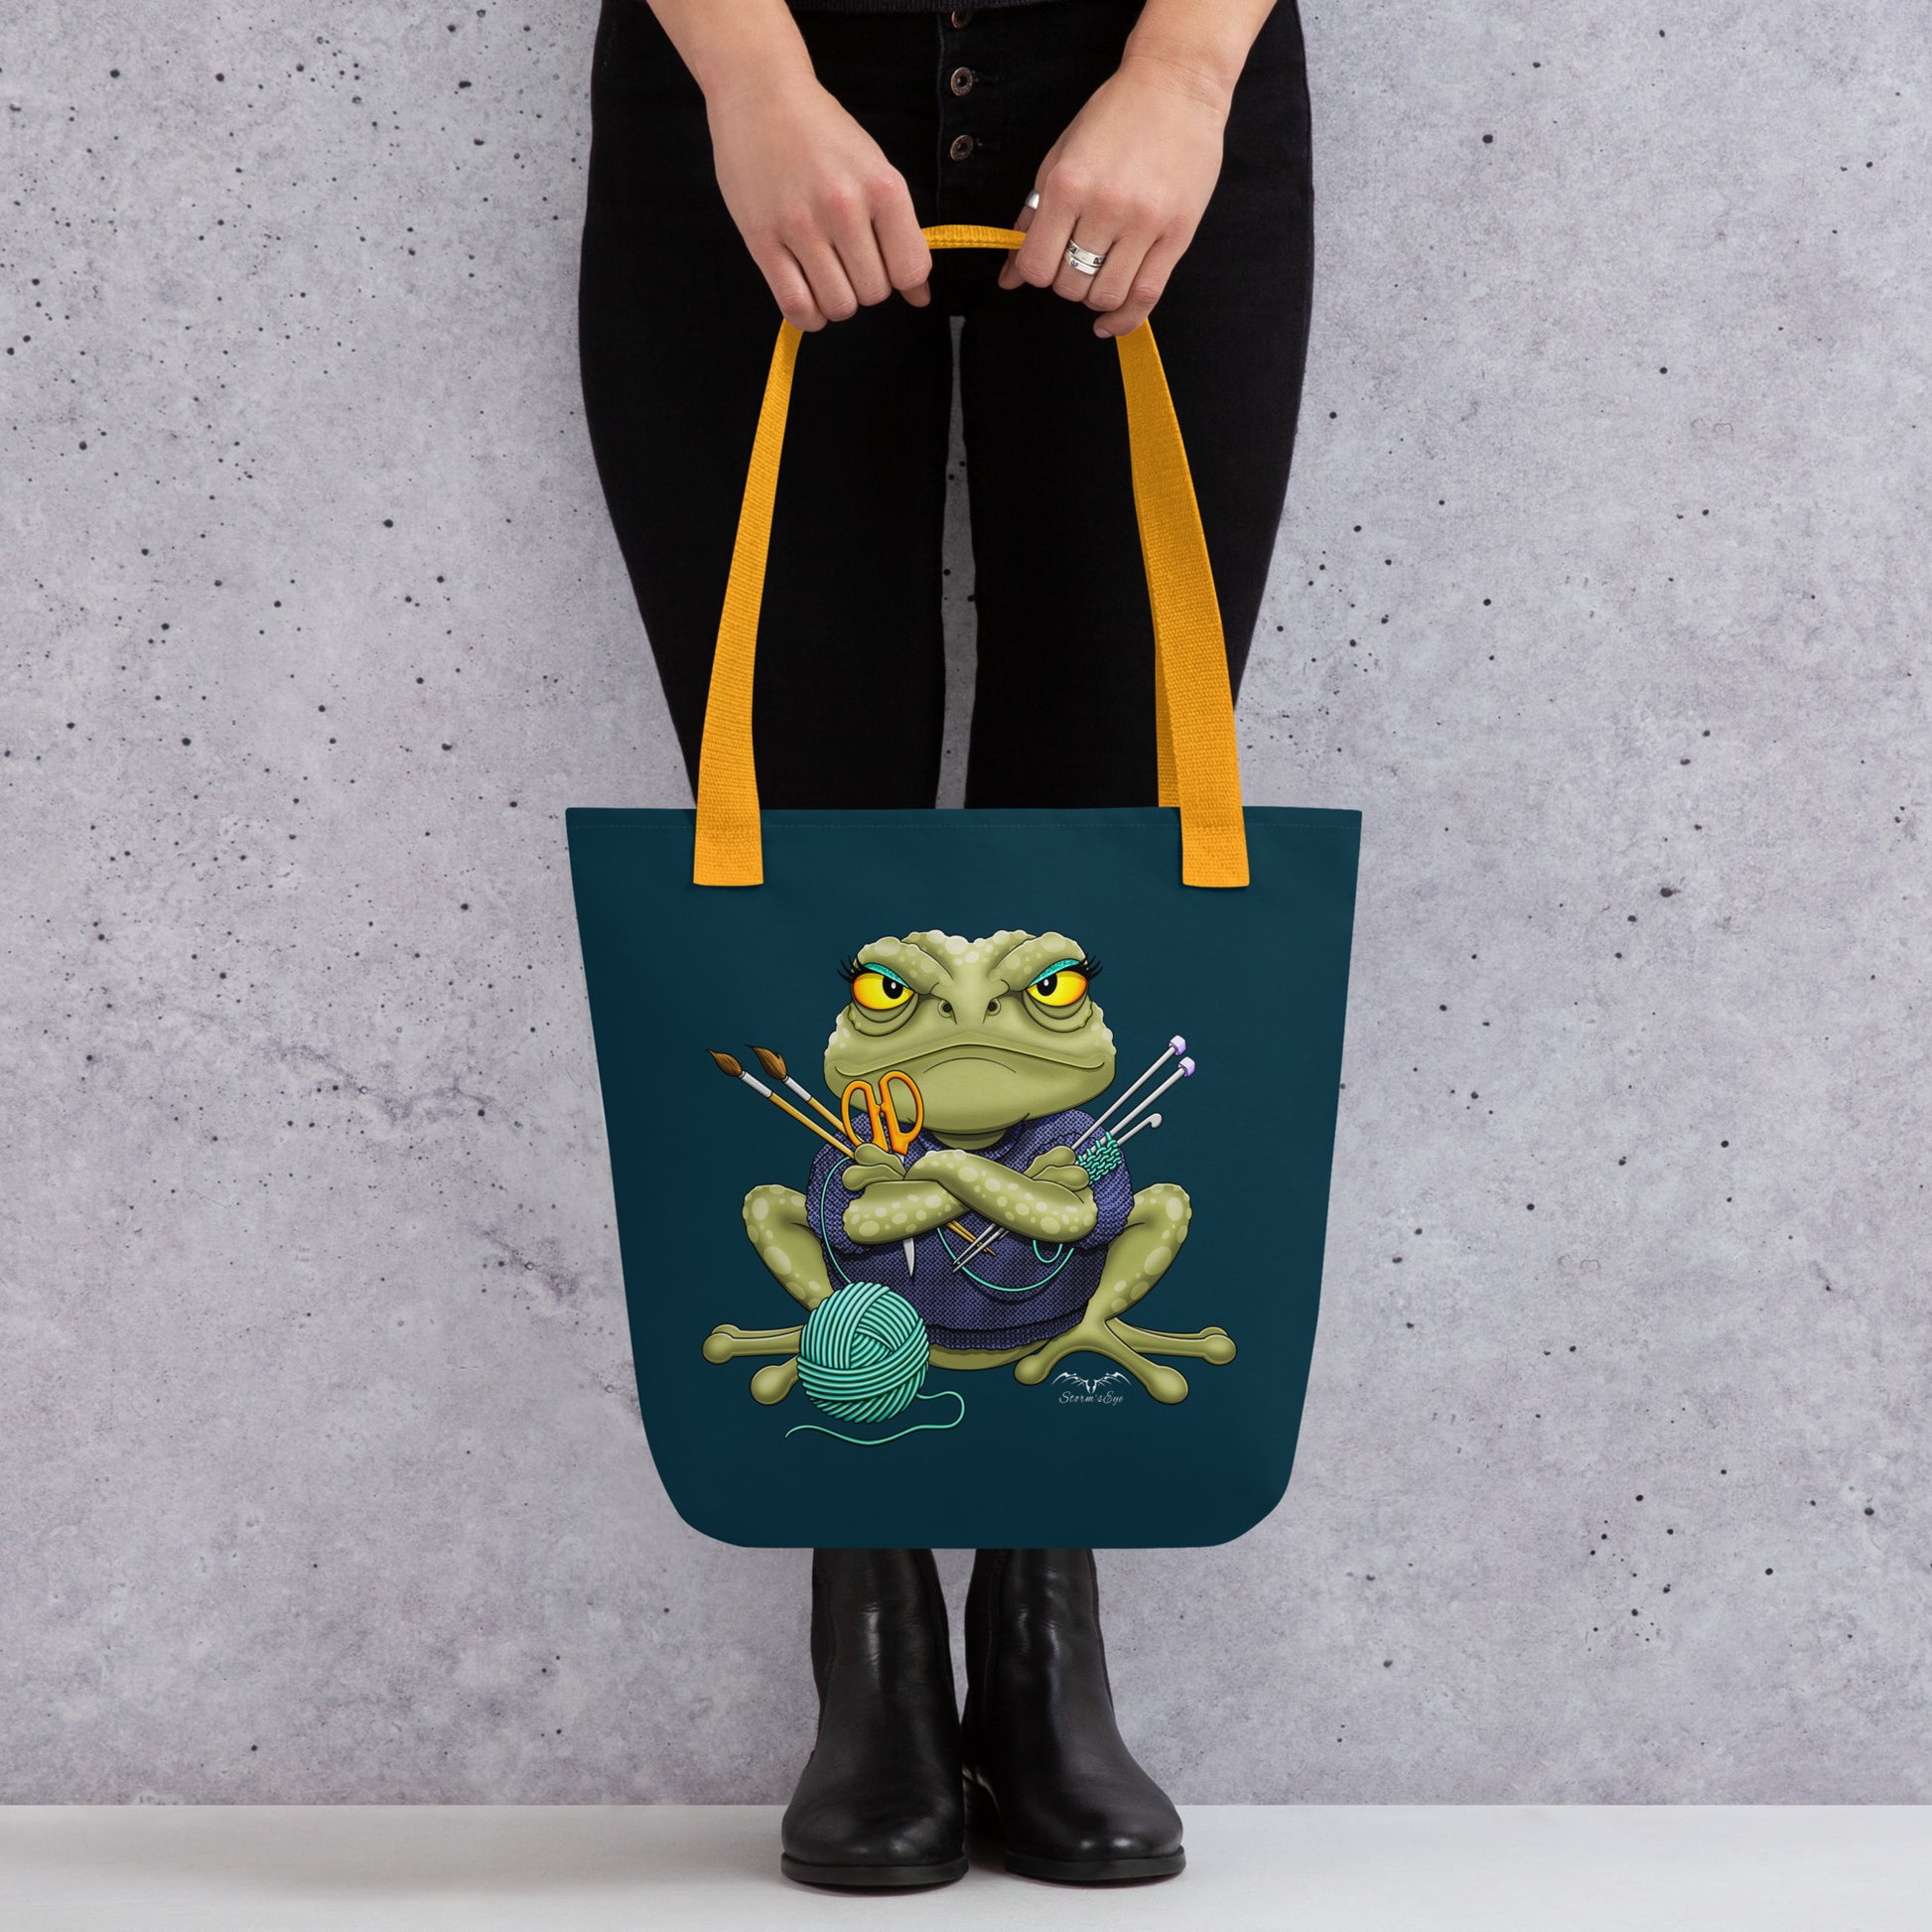 Stormseye design crafting frog large tote bag modelled view